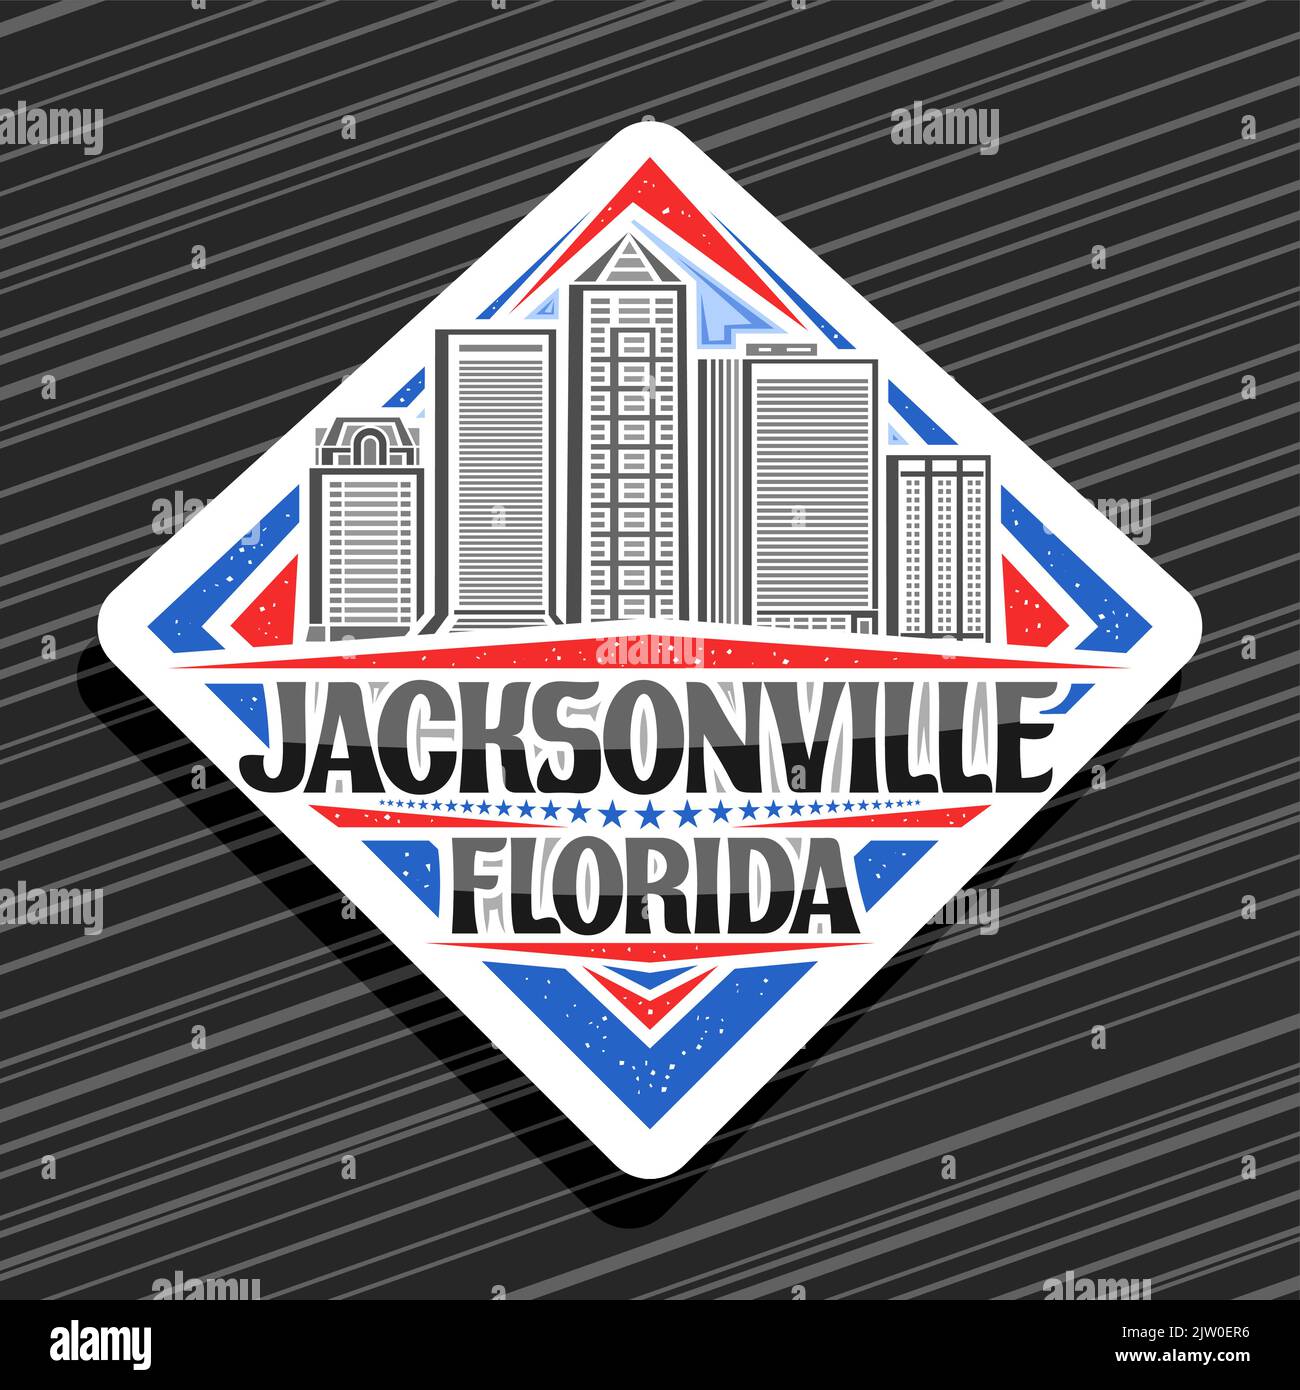 Vector logo for Jacksonville, white rhombus road sign with line illustration of jacksonville city scape on day sky background, decorative refrigerator Stock Vector